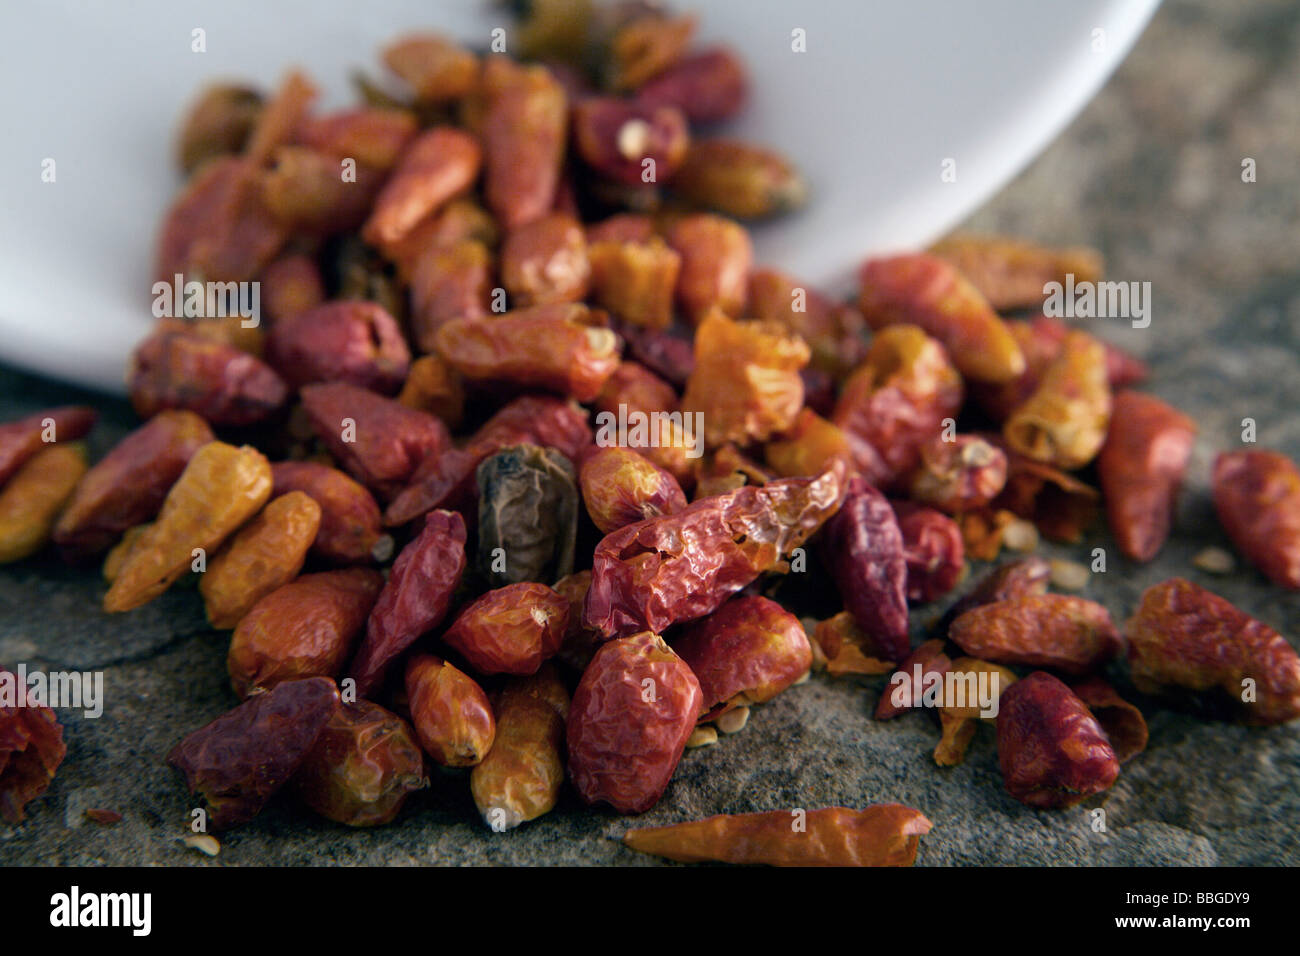 Dried chili peppers tipped from a bowl Stock Photo